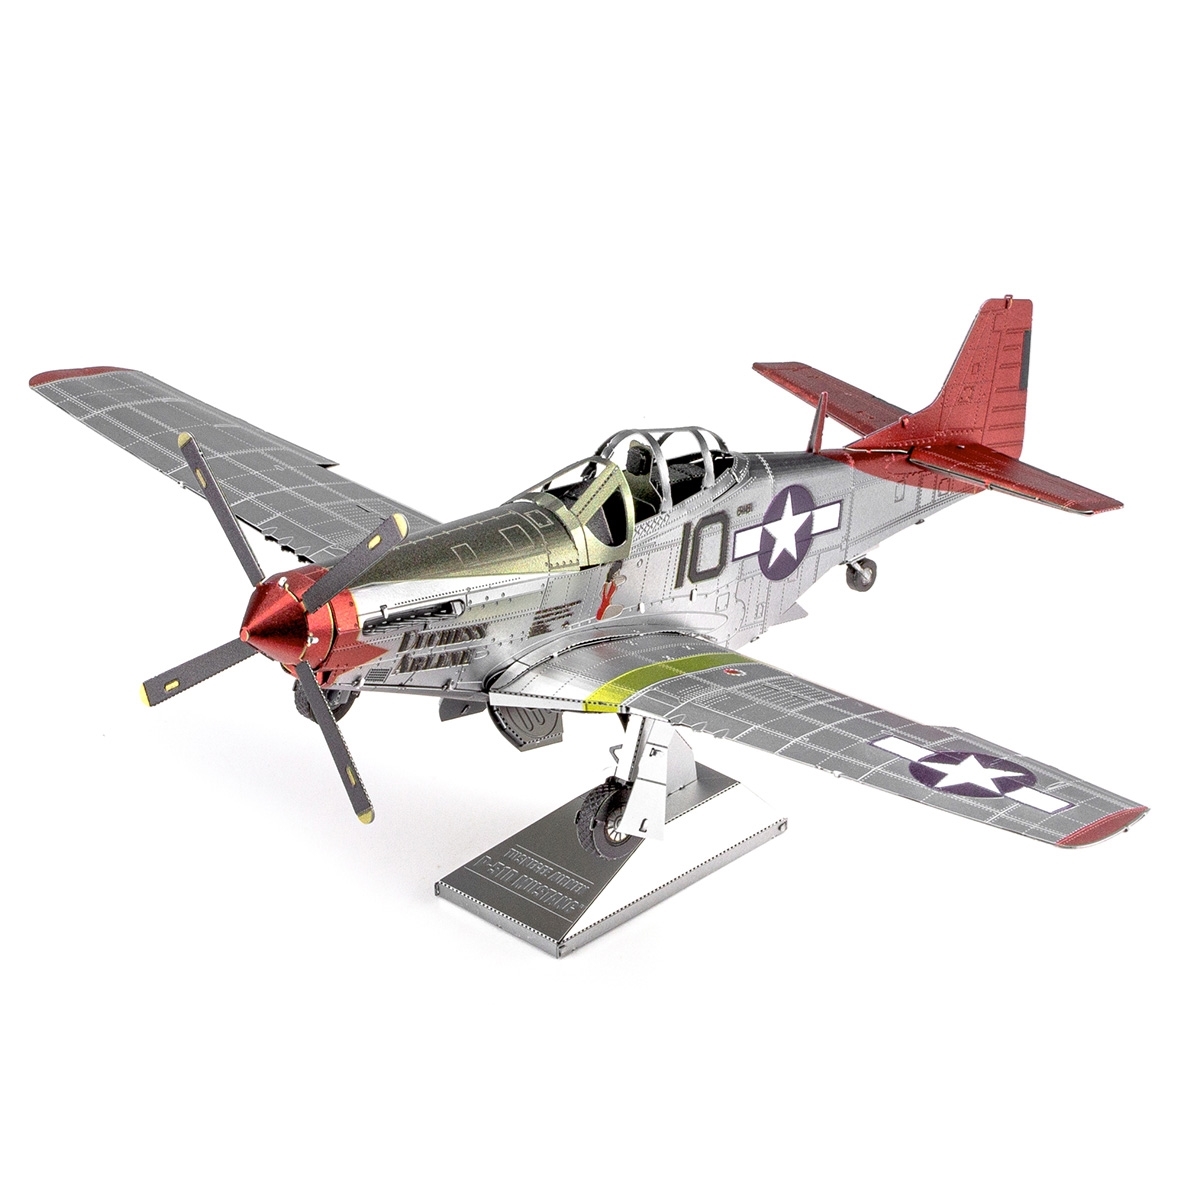 BRAND NEW FACTORY SEALED Details about   METAL EARTH P-51 MUSTANG STEEL KIT 